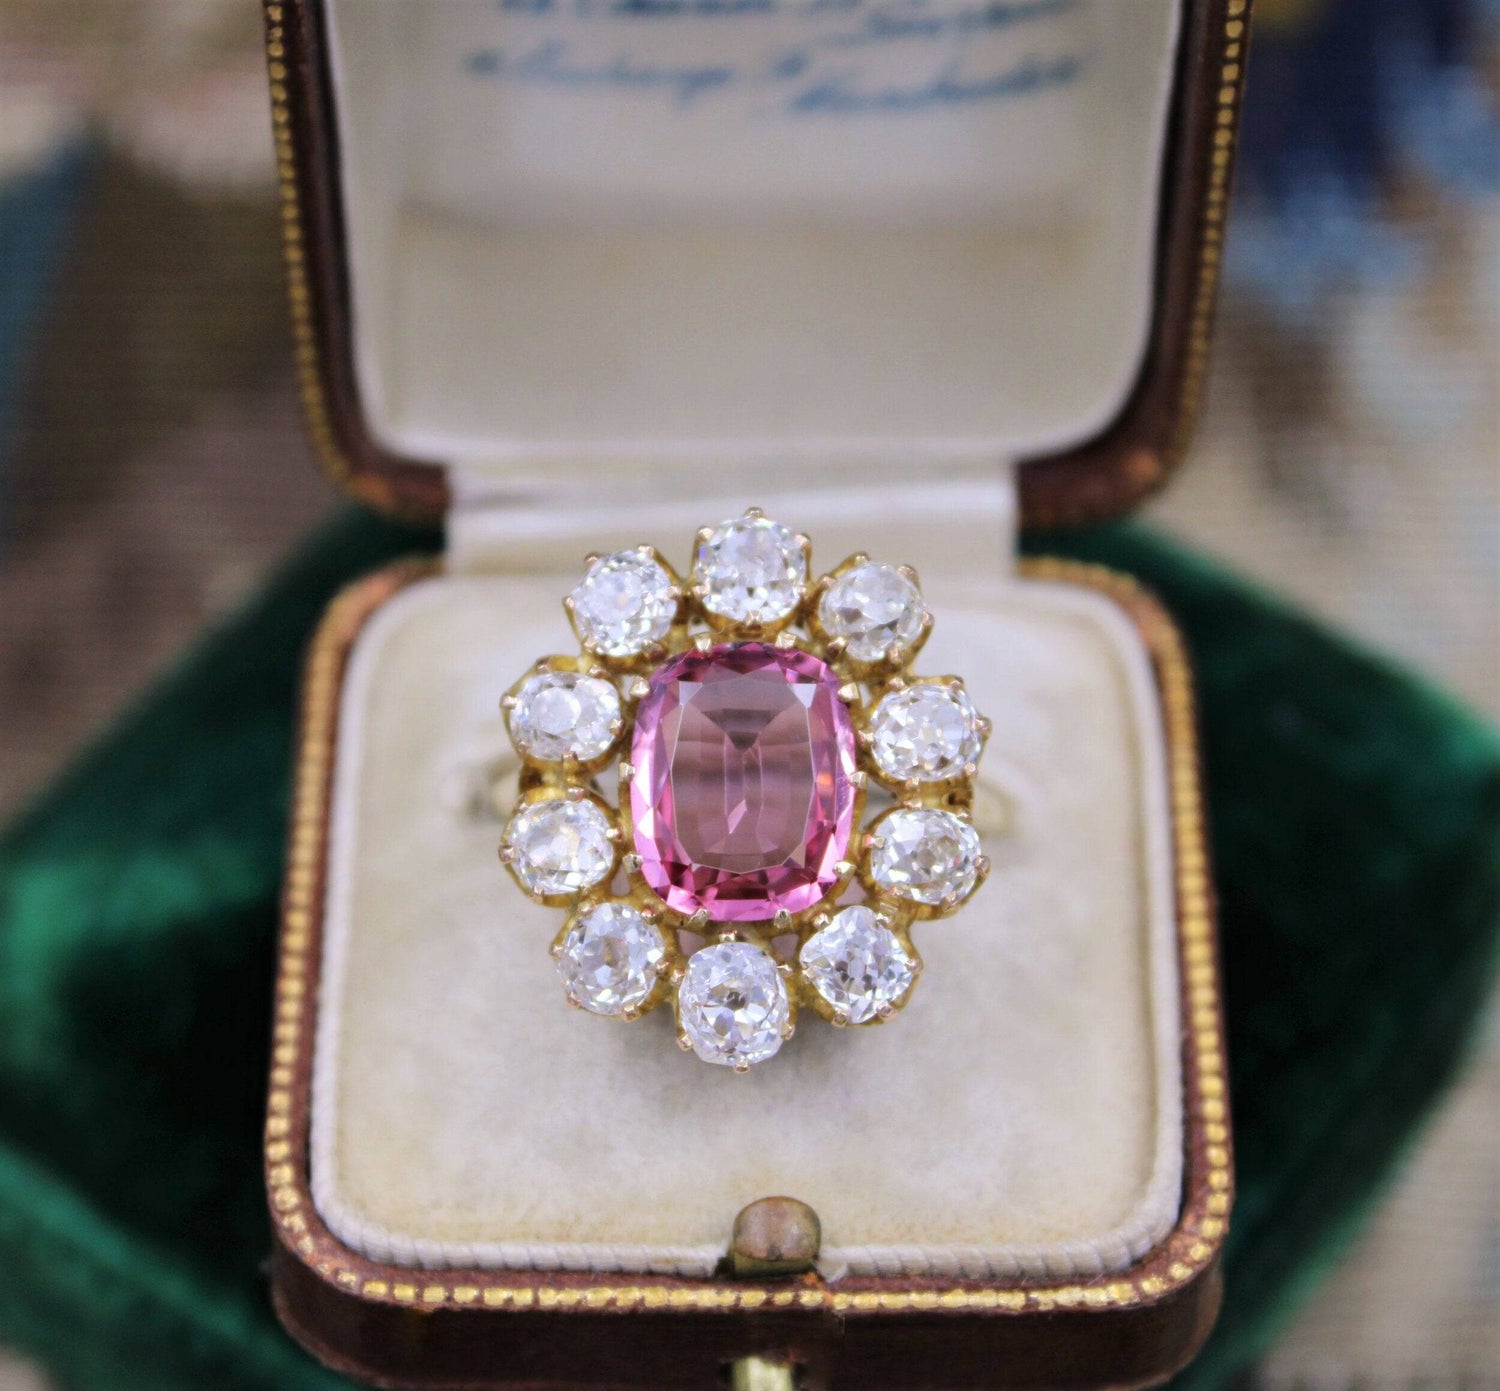 An extraordinary and rare 3.00 Carat Natural Pink Spinel & Diamond Cluster Ring set in 18 Carat Yellow Gold, English, Circa 1900 - Robin Haydock Antiques